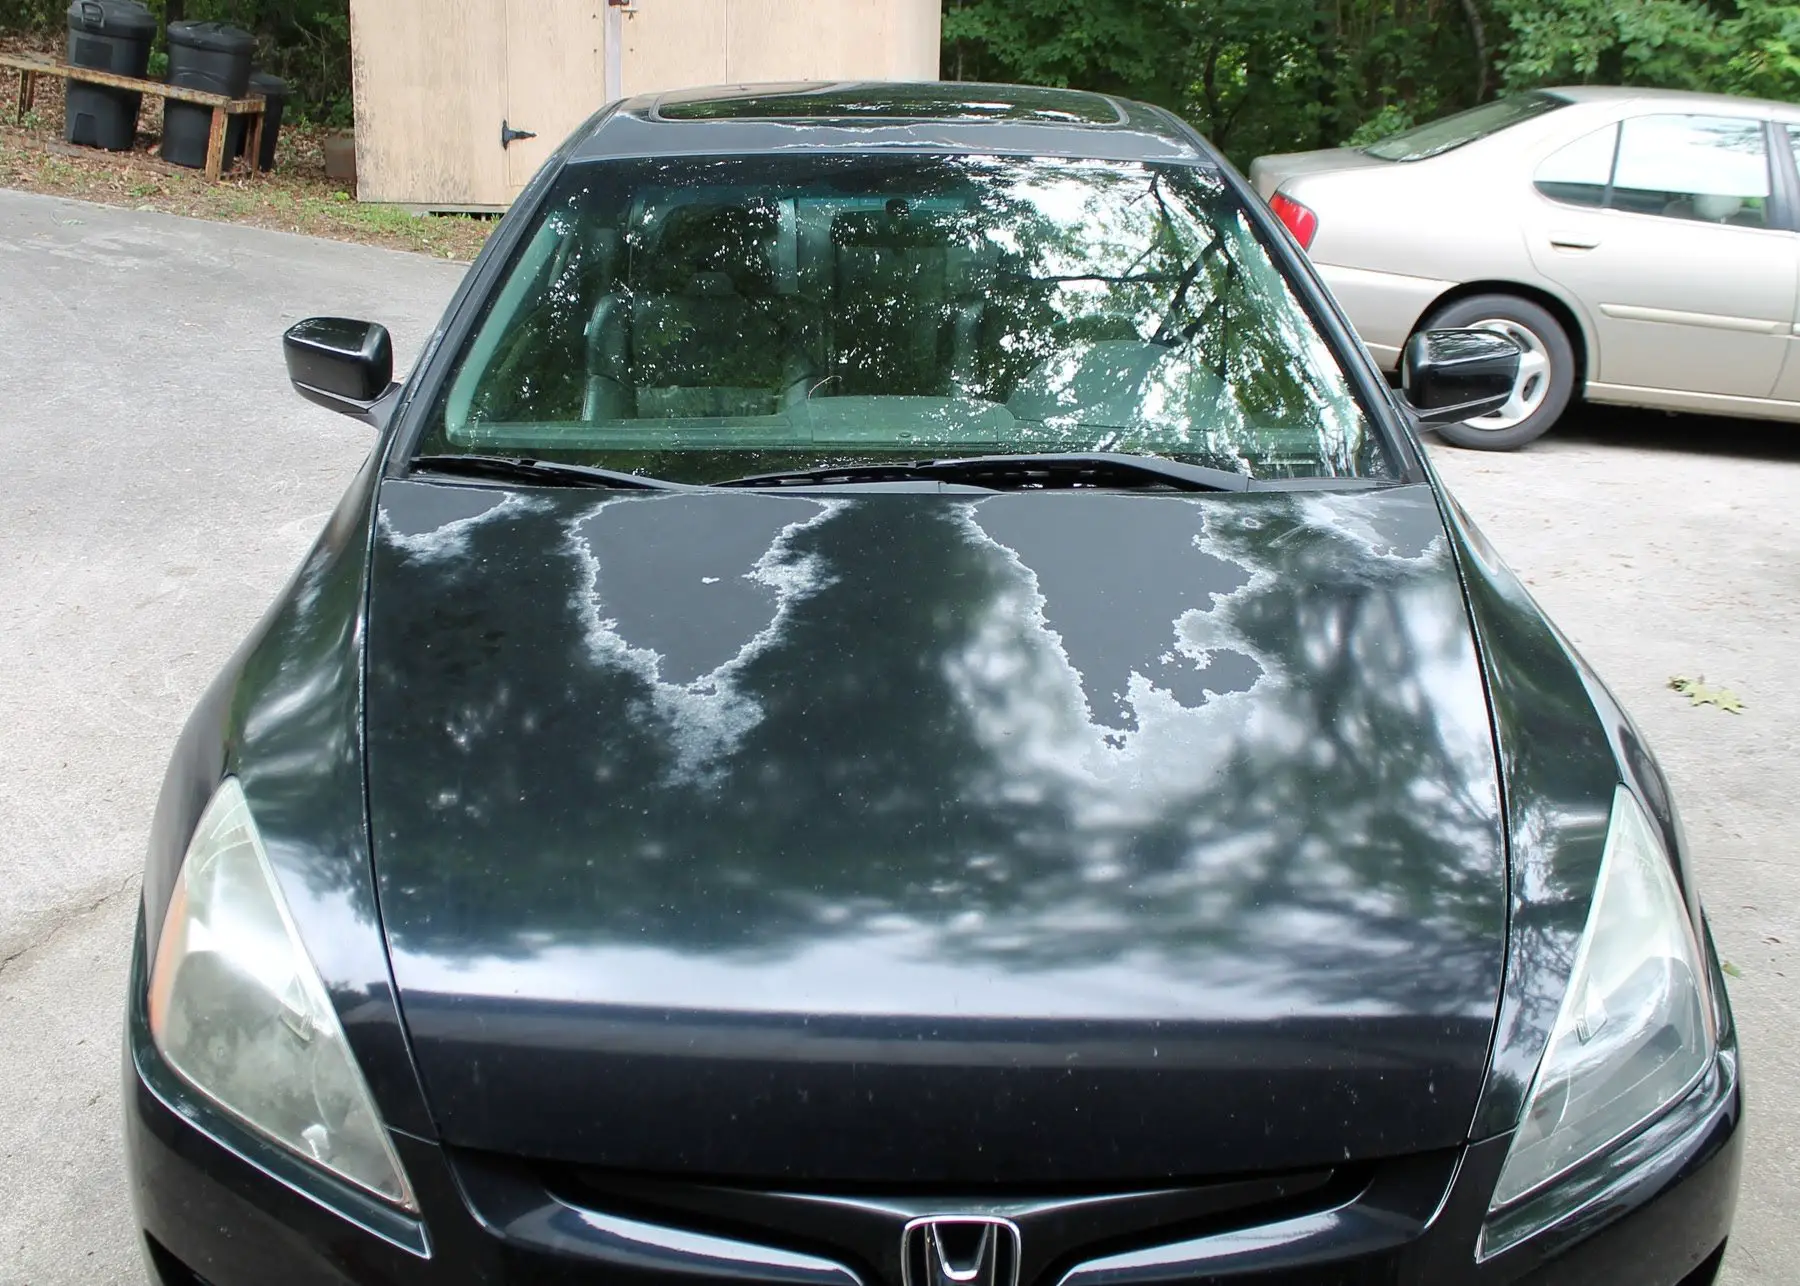 Learn How To Easily Fix The Peeling Clear Coat On Your Car!